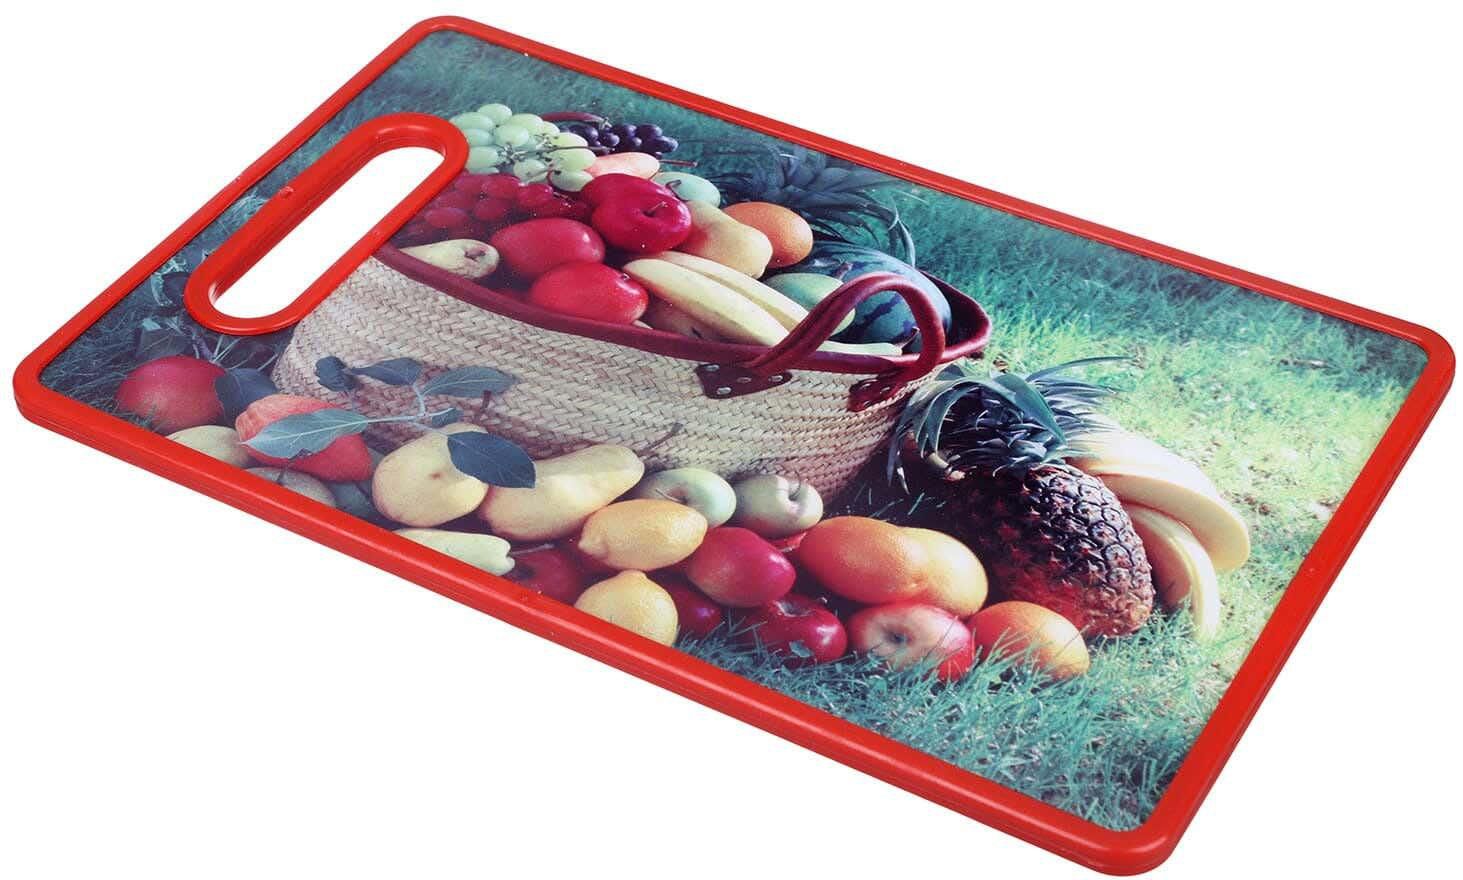 Get Elcheef Rectangle Cutting Plate, 22×36 cm - Multicolor with best offers | Raneen.com